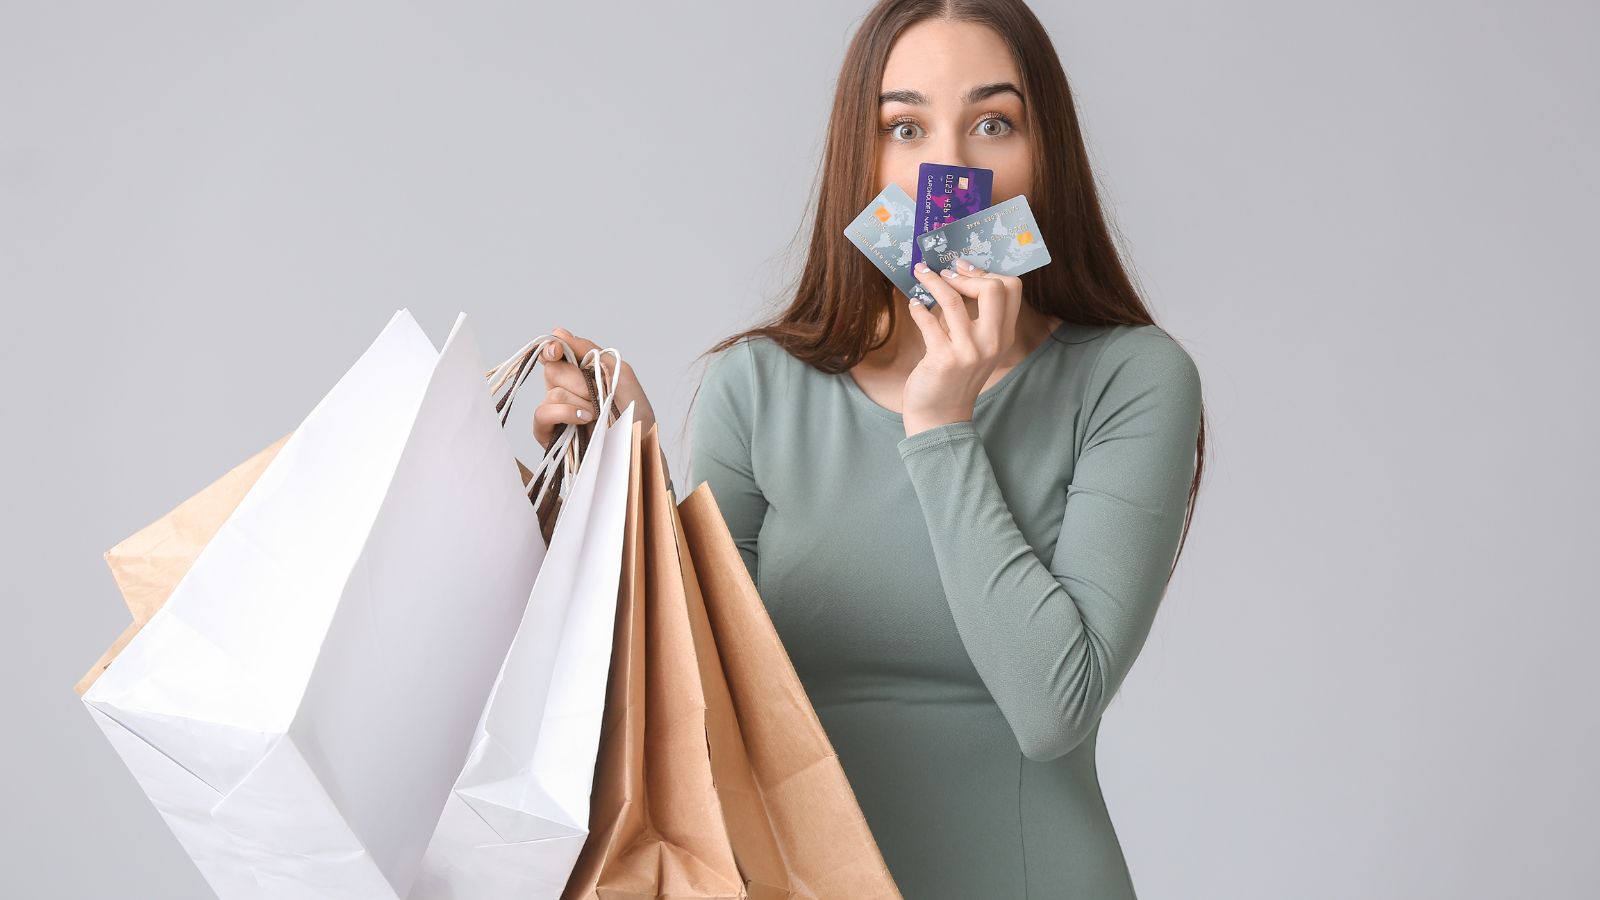 a woman holding shopping bags and a credit card